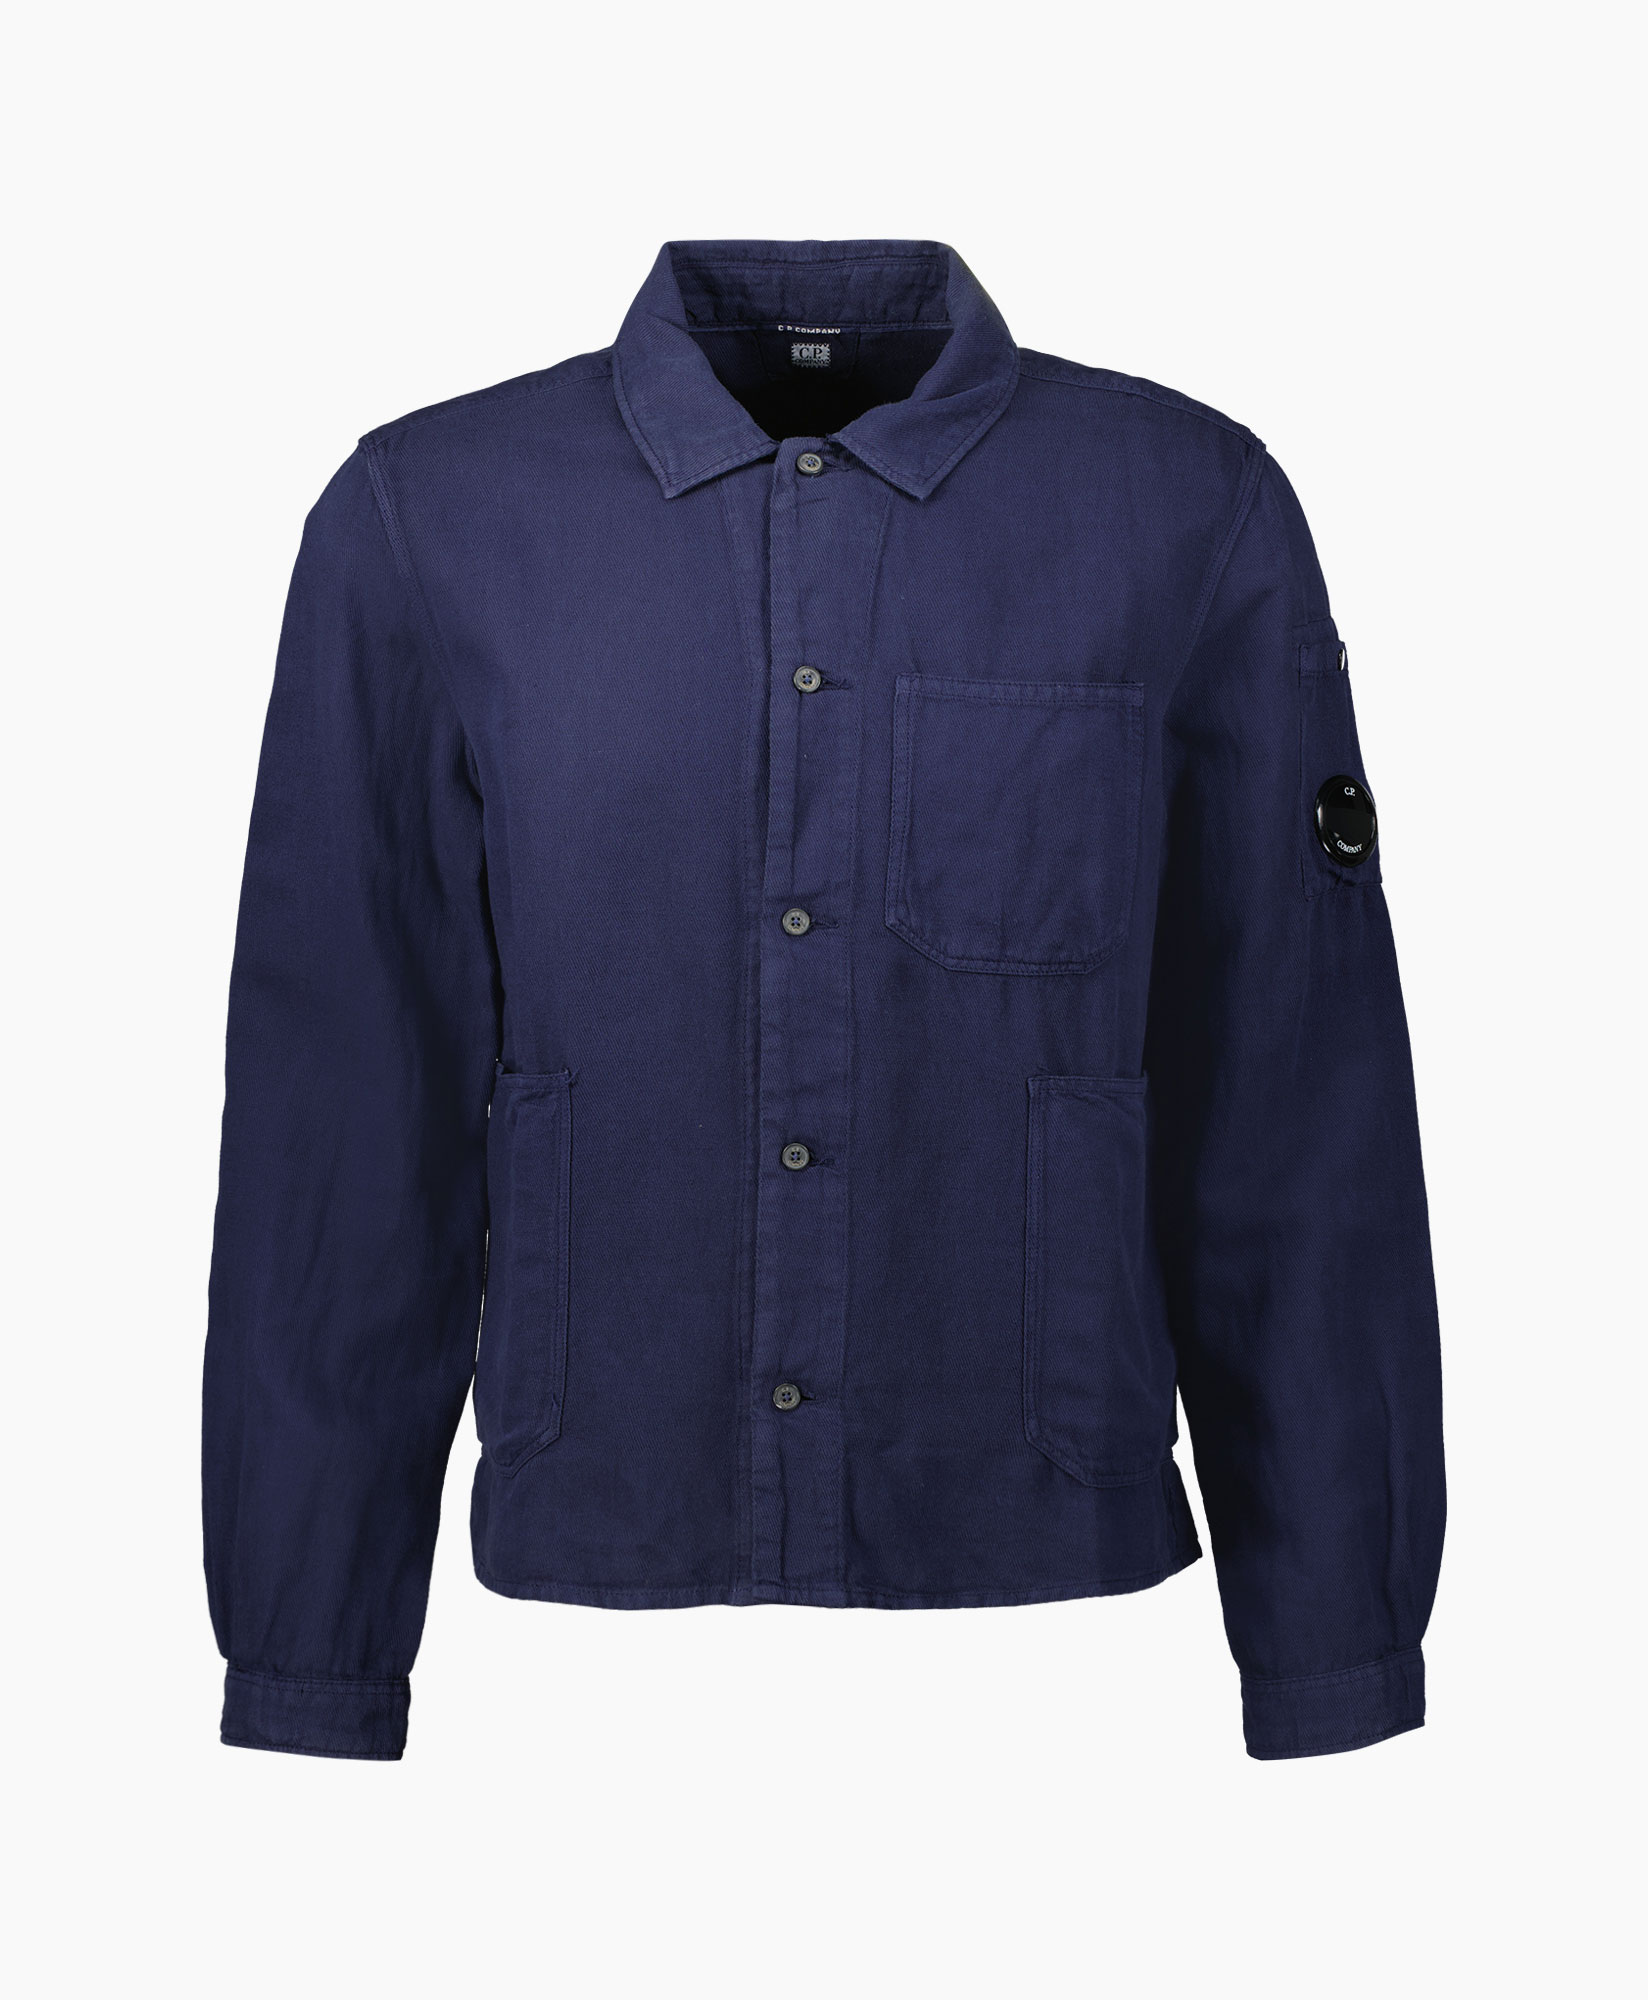 Cp Company Overshirt 14cmsh276a-006501 Donker Blauw